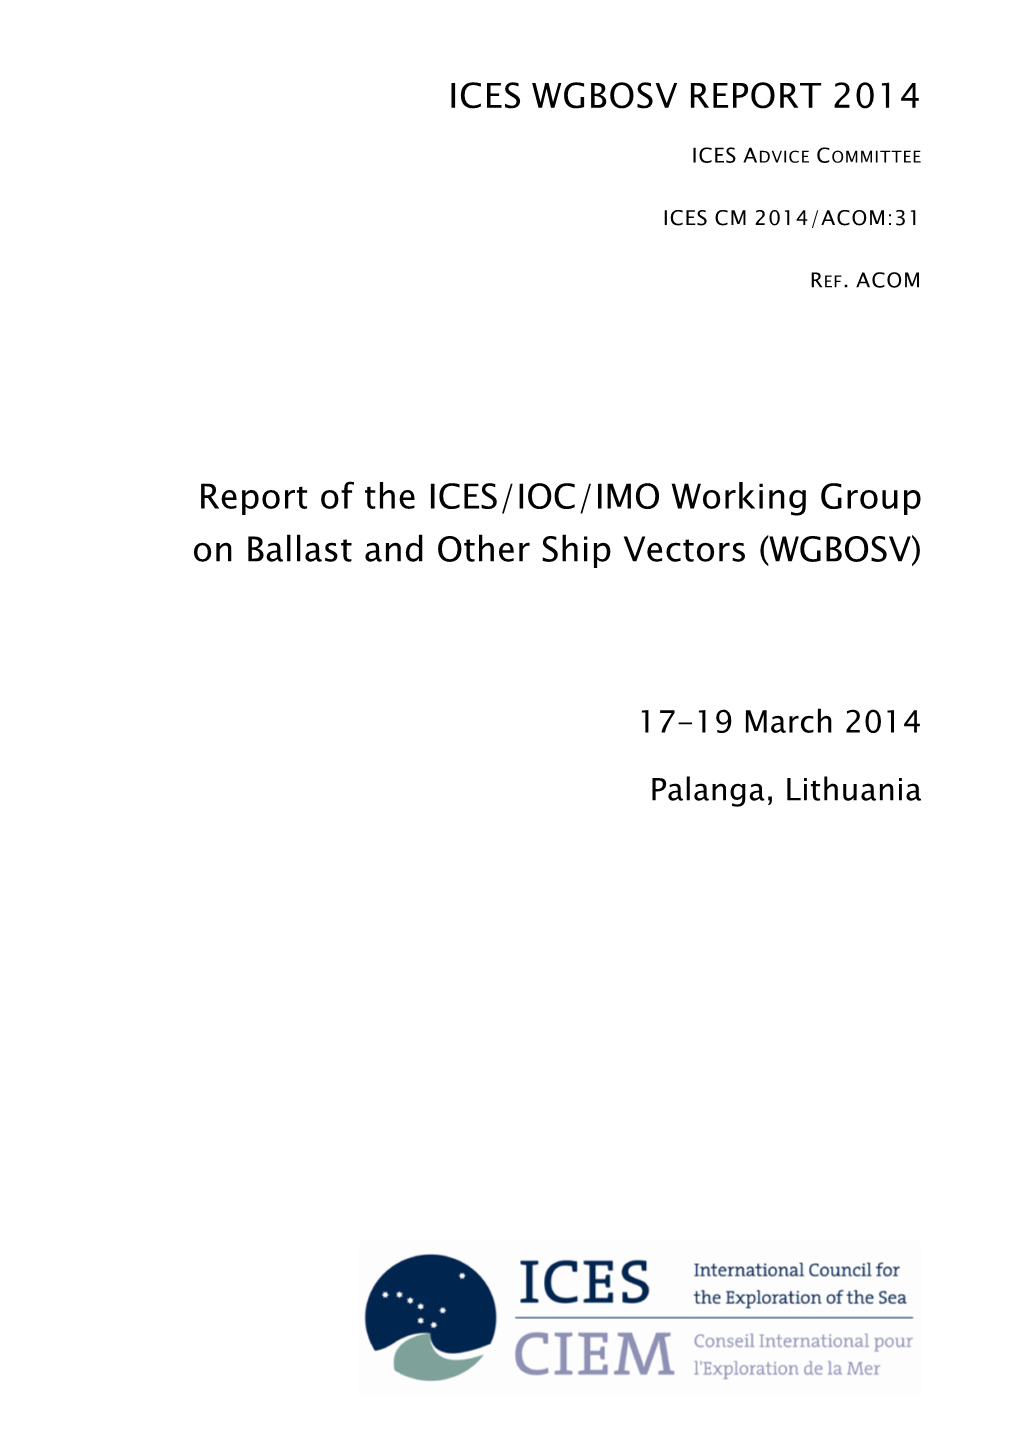 ICES WGBOSV REPORT 2014 Report of the ICES/IOC/IMO Working